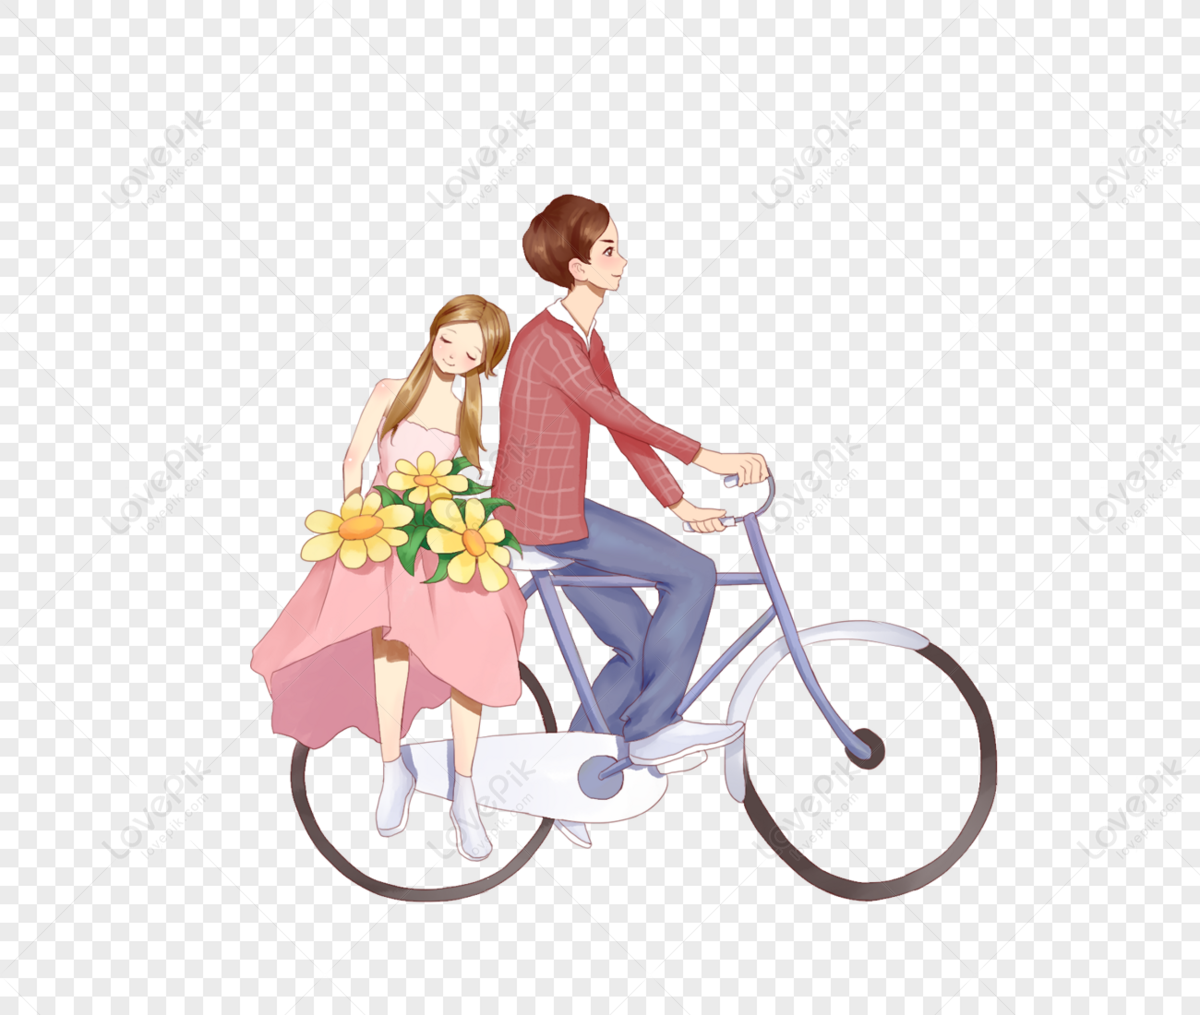 Bicycle Lovers PNG Hd Transparent Image And Clipart Image For Free Download  - Lovepik | 400194854